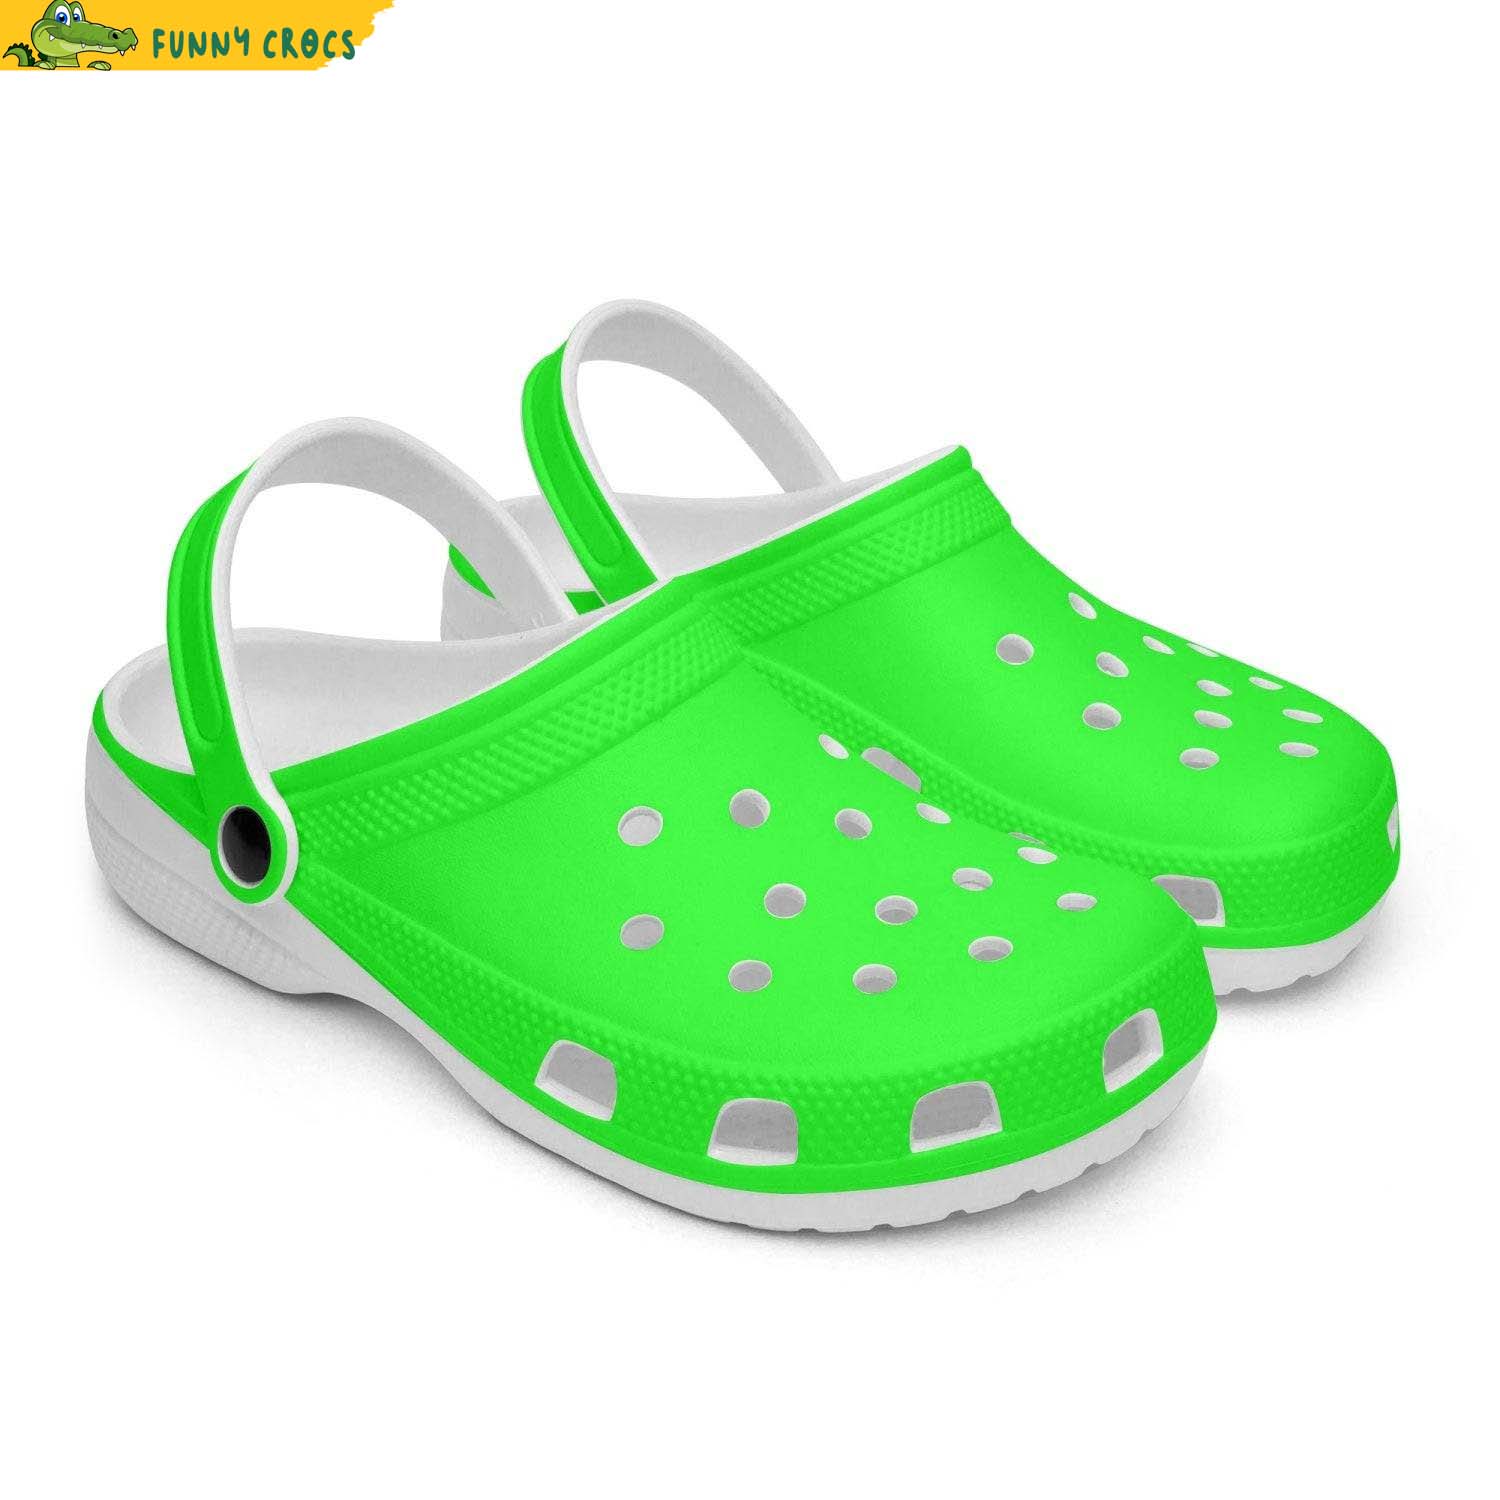 Green - Step style with Funny Crocs